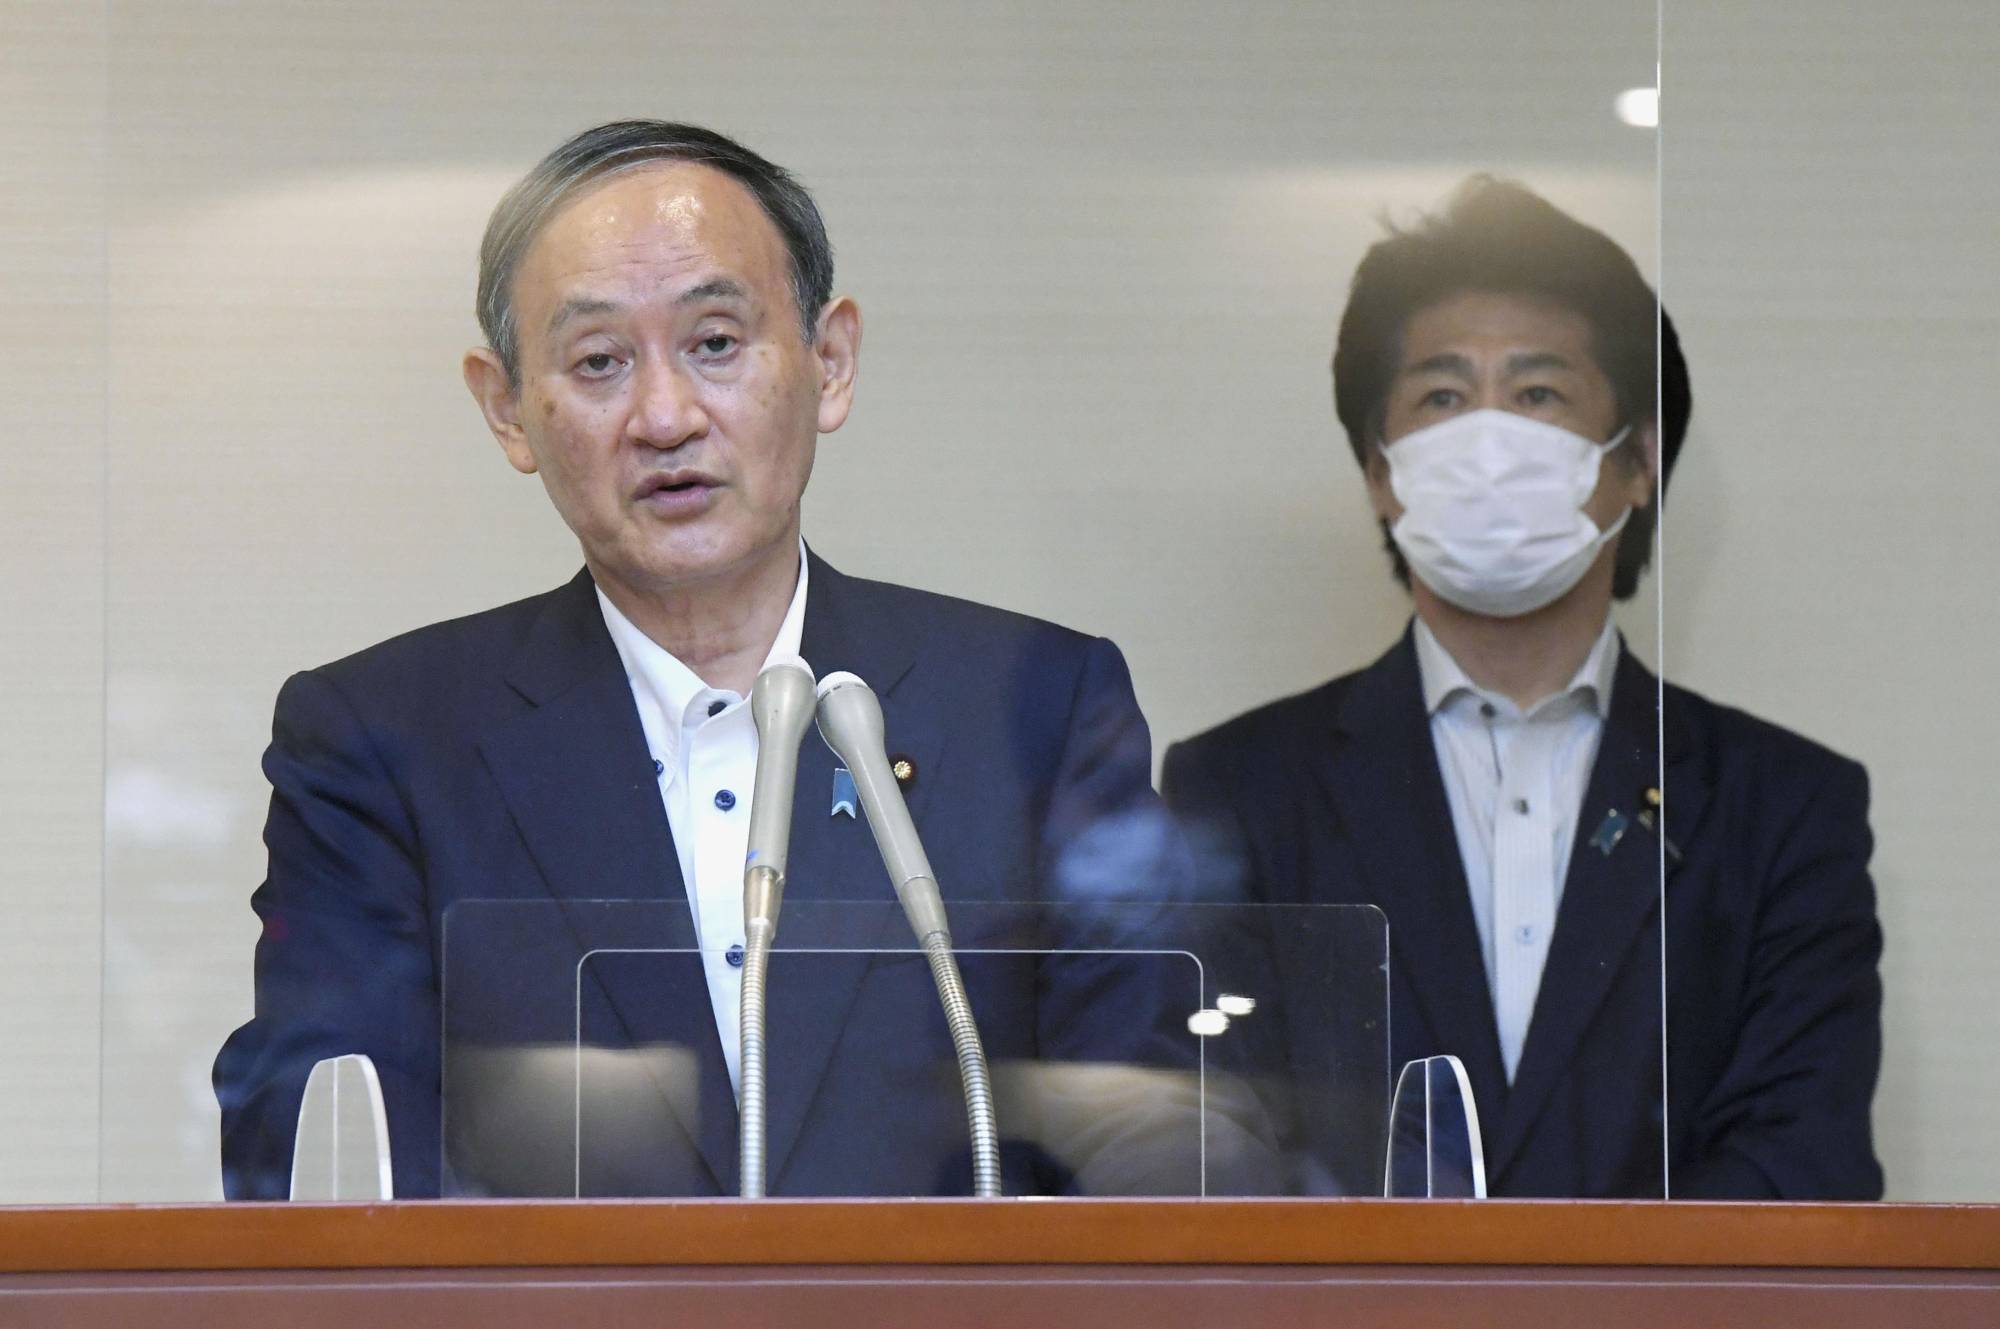 Prime Minister Yoshihide Suga speaks to reporters in Tokyo on Monday, as health minister Norihisa Tamura stands behind him. | POOL / VIA KYODO